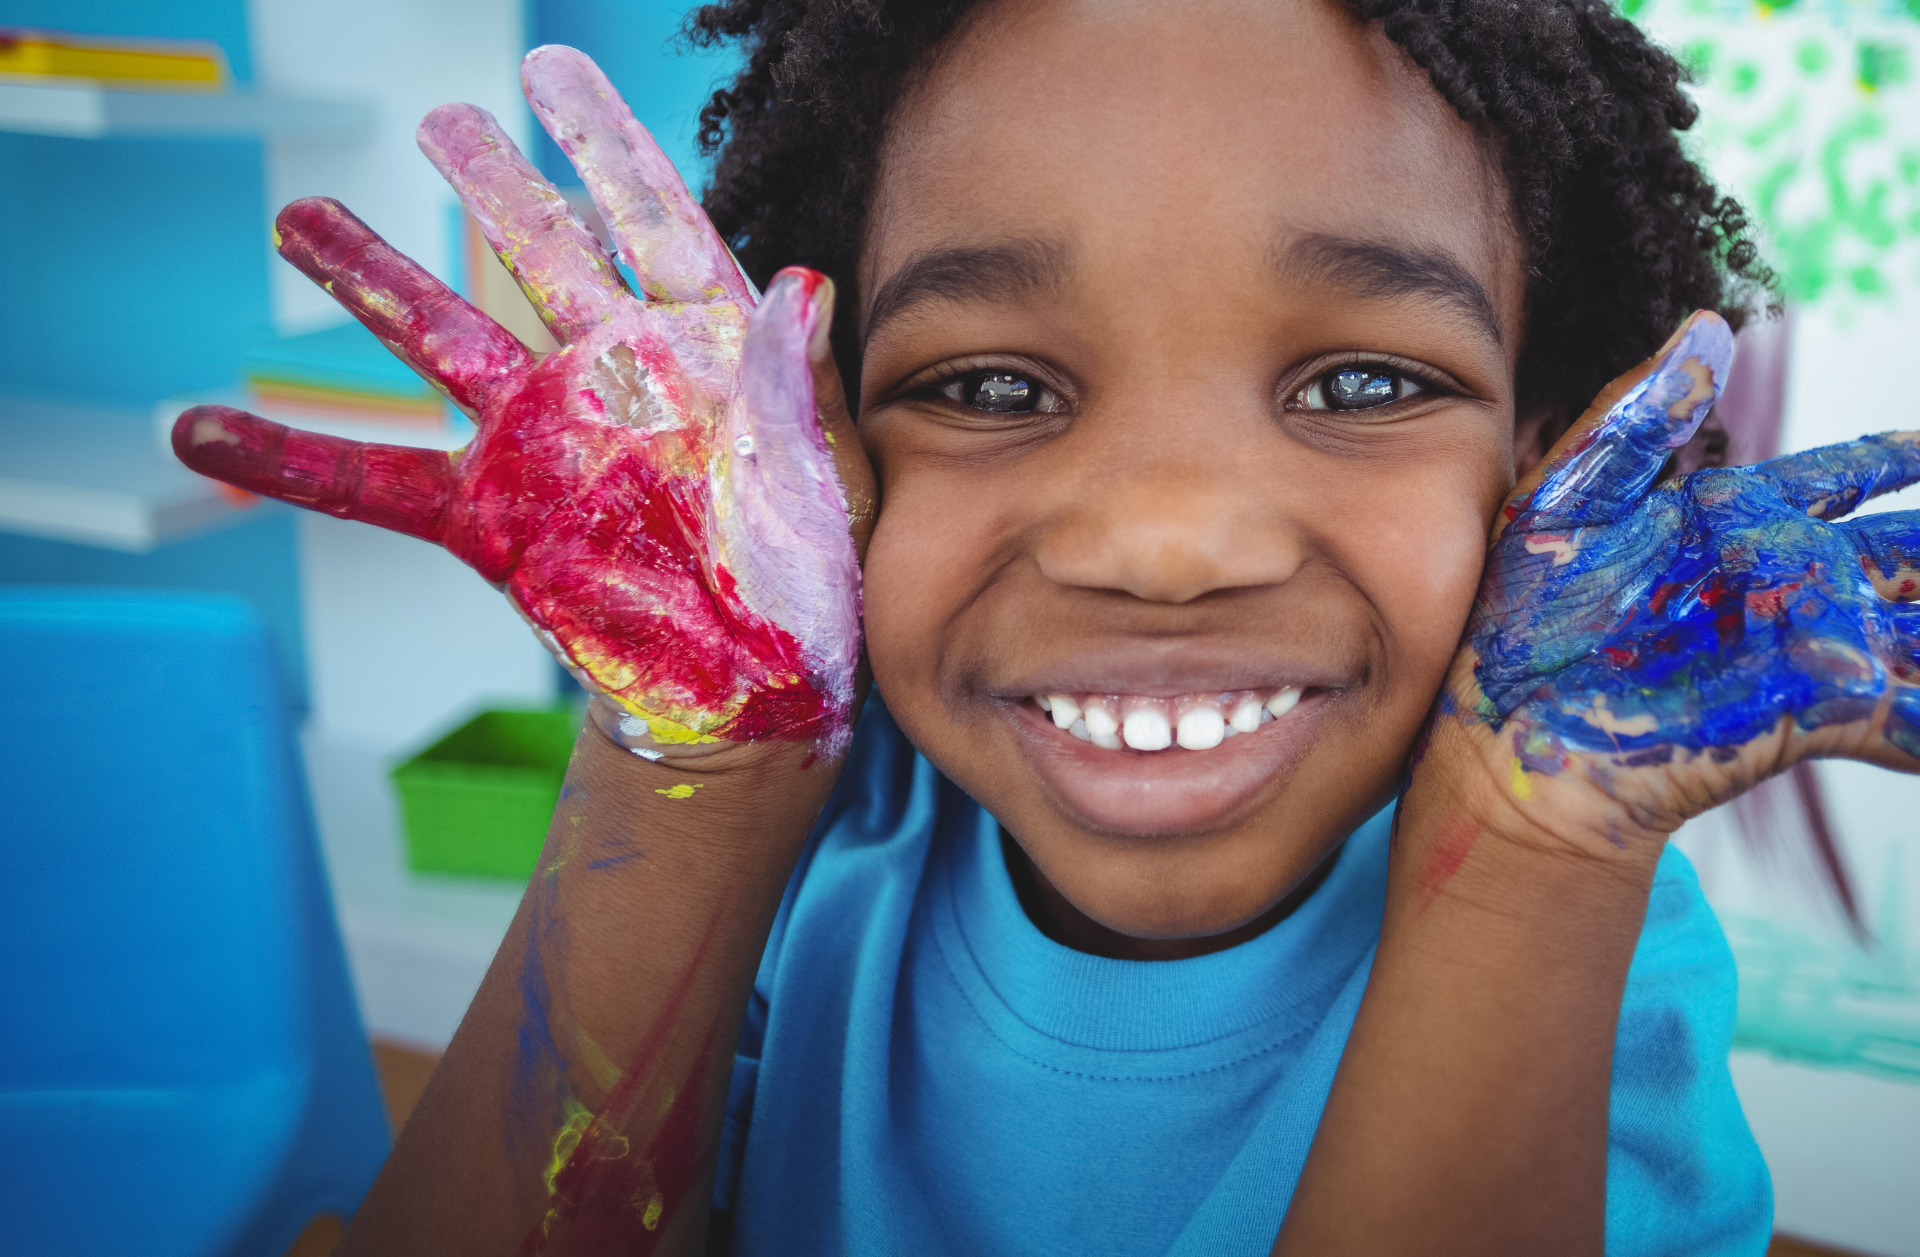 A young Black boy in art class. He's smiling closeup to the camera lens with red paint on his left palm and purple paint on his right palm.